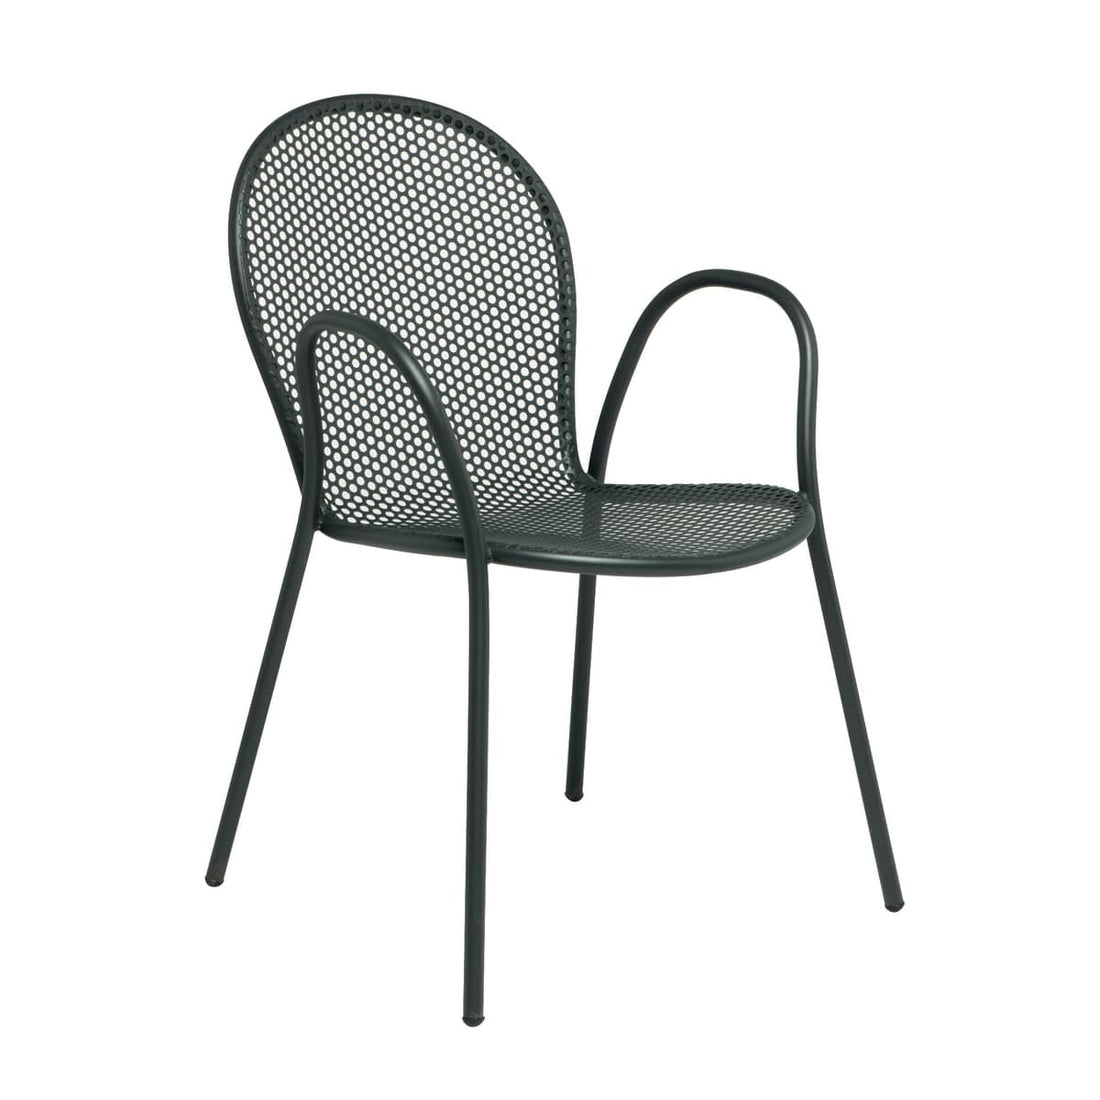 STACKABLE CHAIR WITH ANTHRACITE ARMRESTS - best price from Maltashopper.com BR500013044